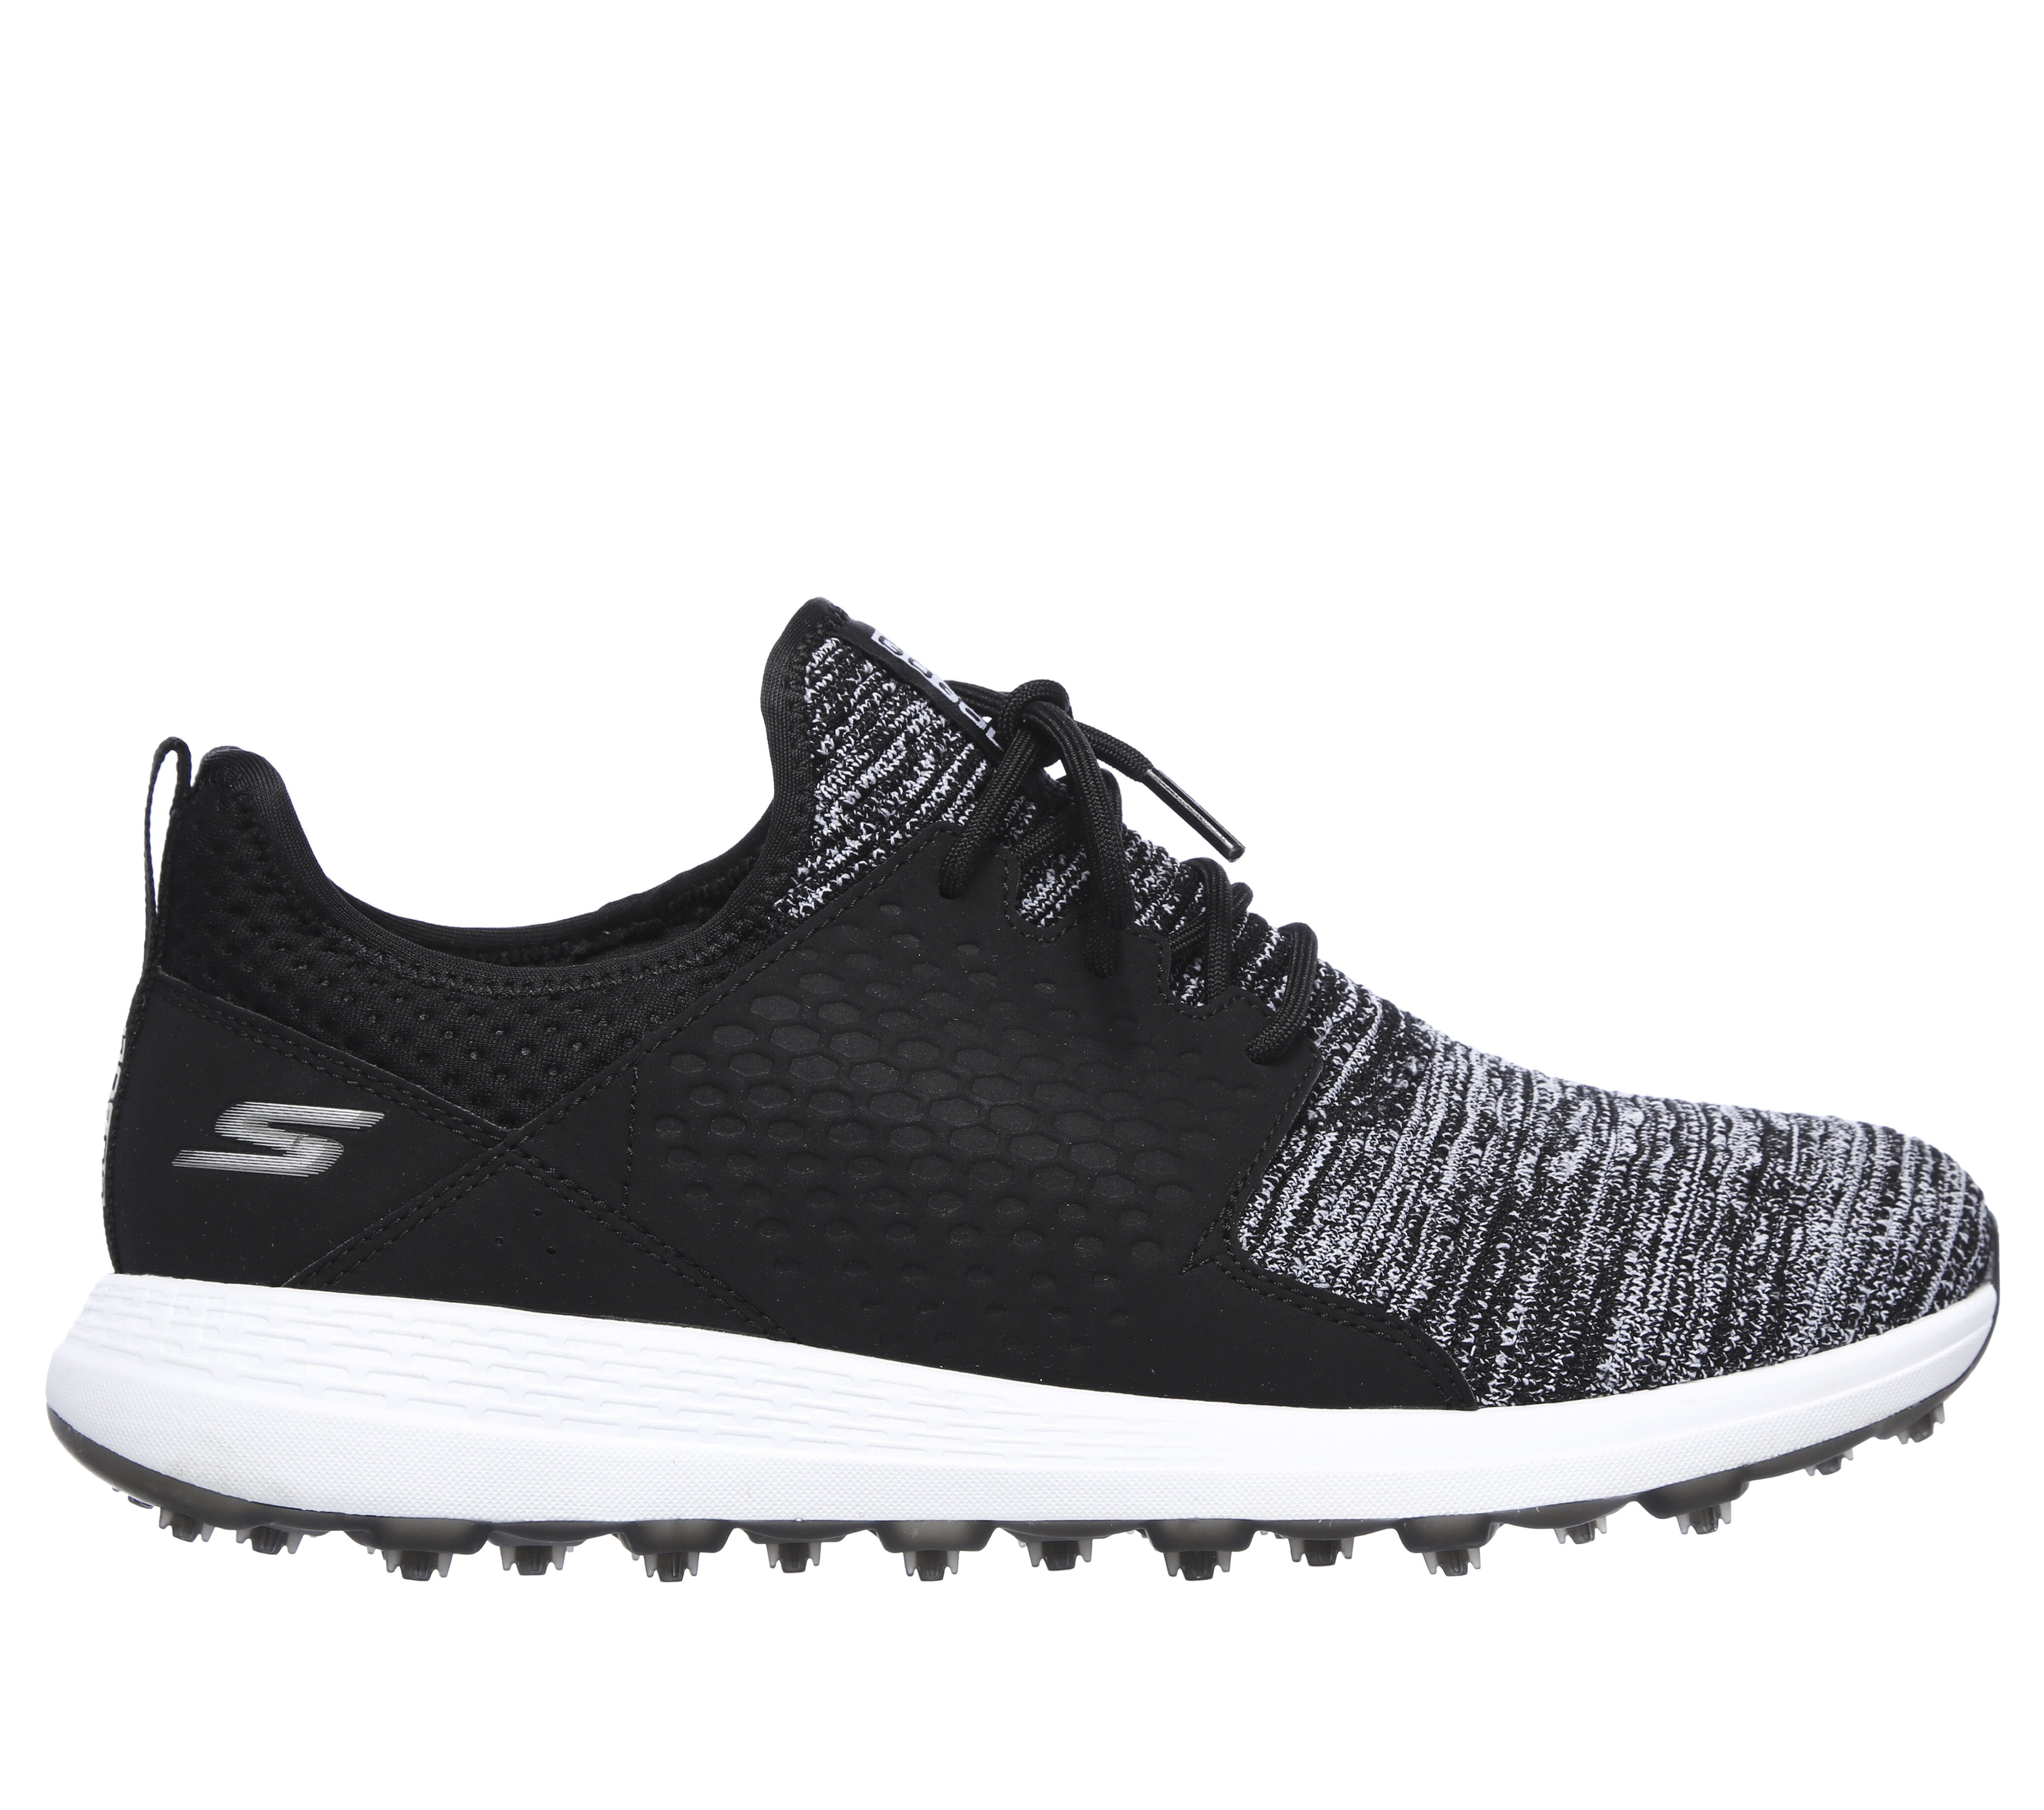 skechers max rover golf shoes